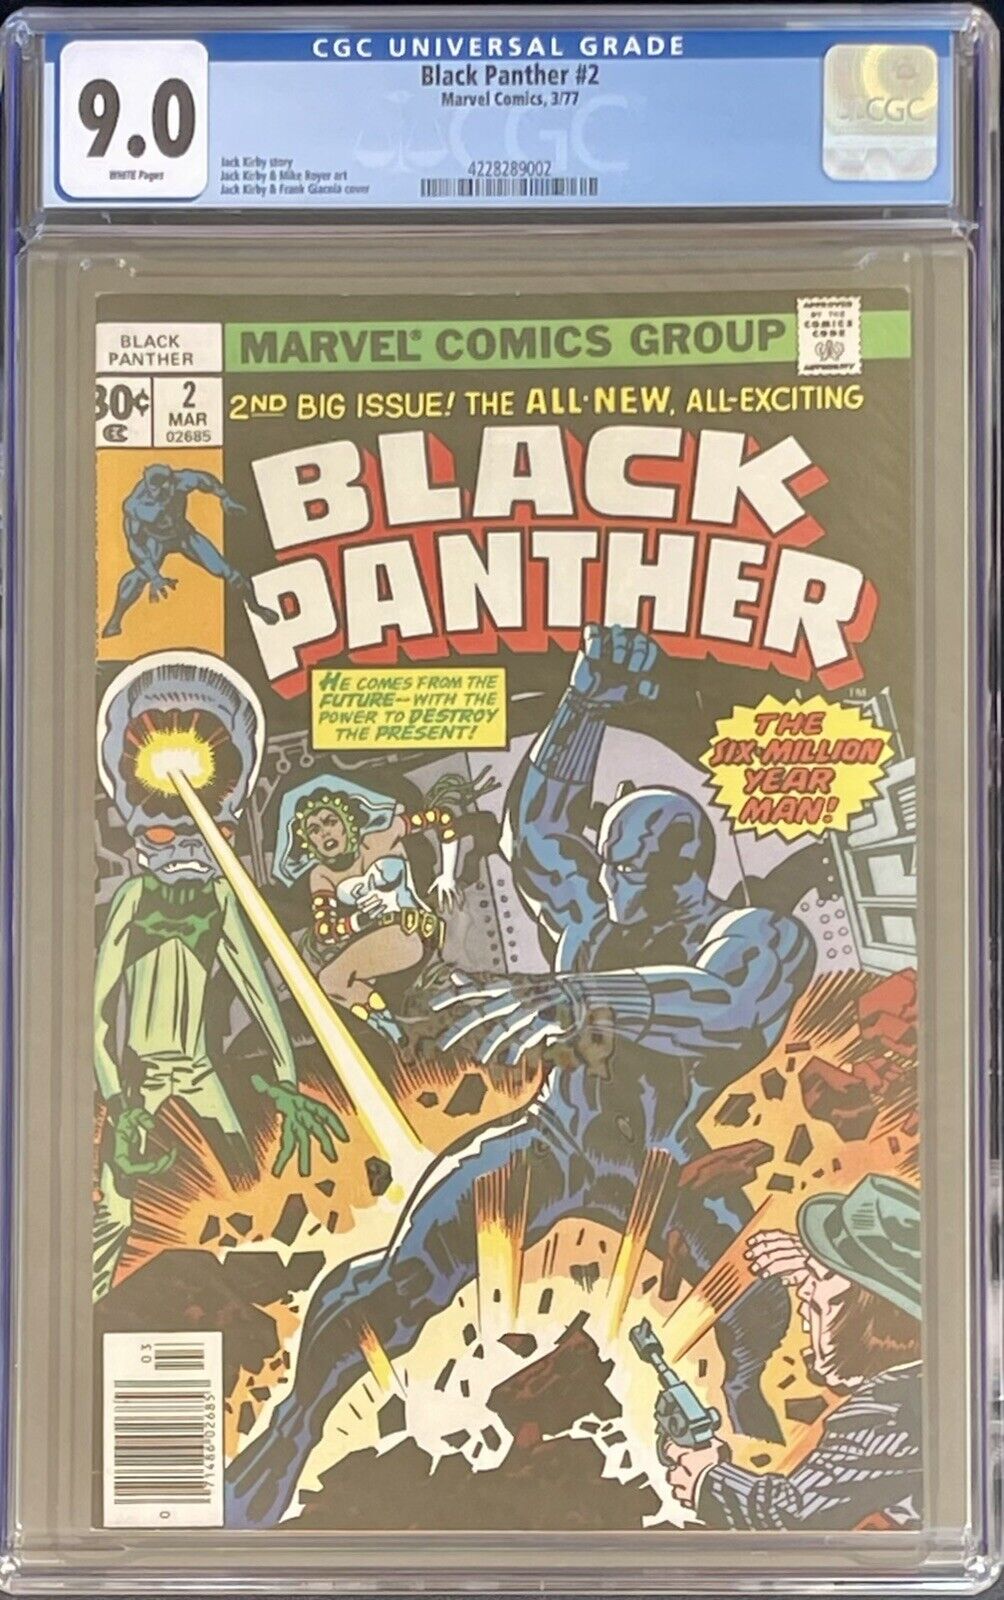 Black Panther #2 CGC 9.0 (1977) White Pages